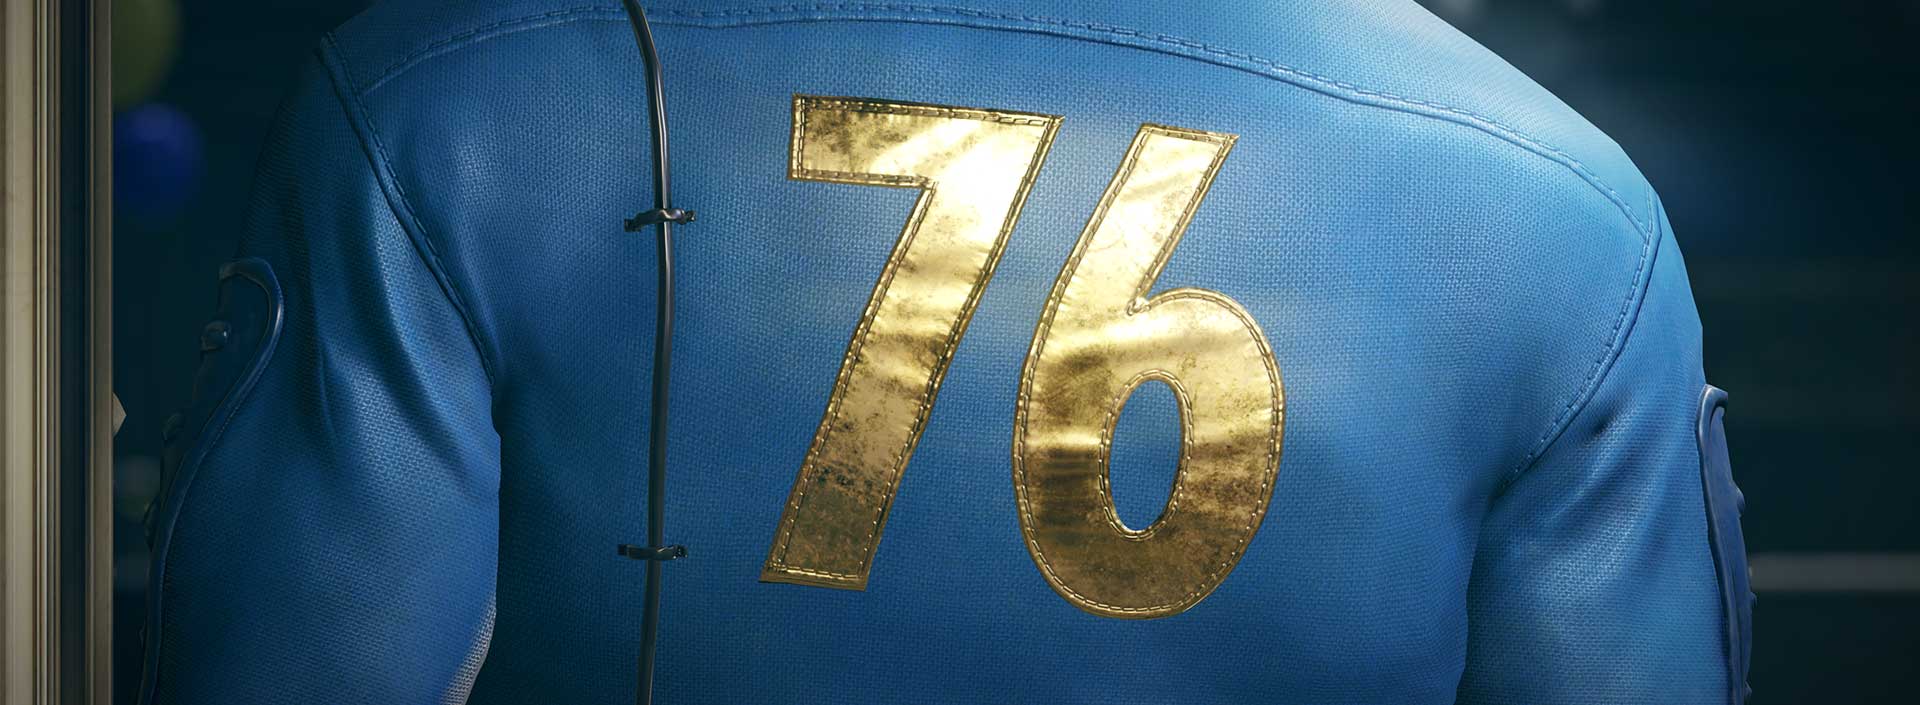 Fallout 76: TOP 5 beginner’s tips and tricks guide